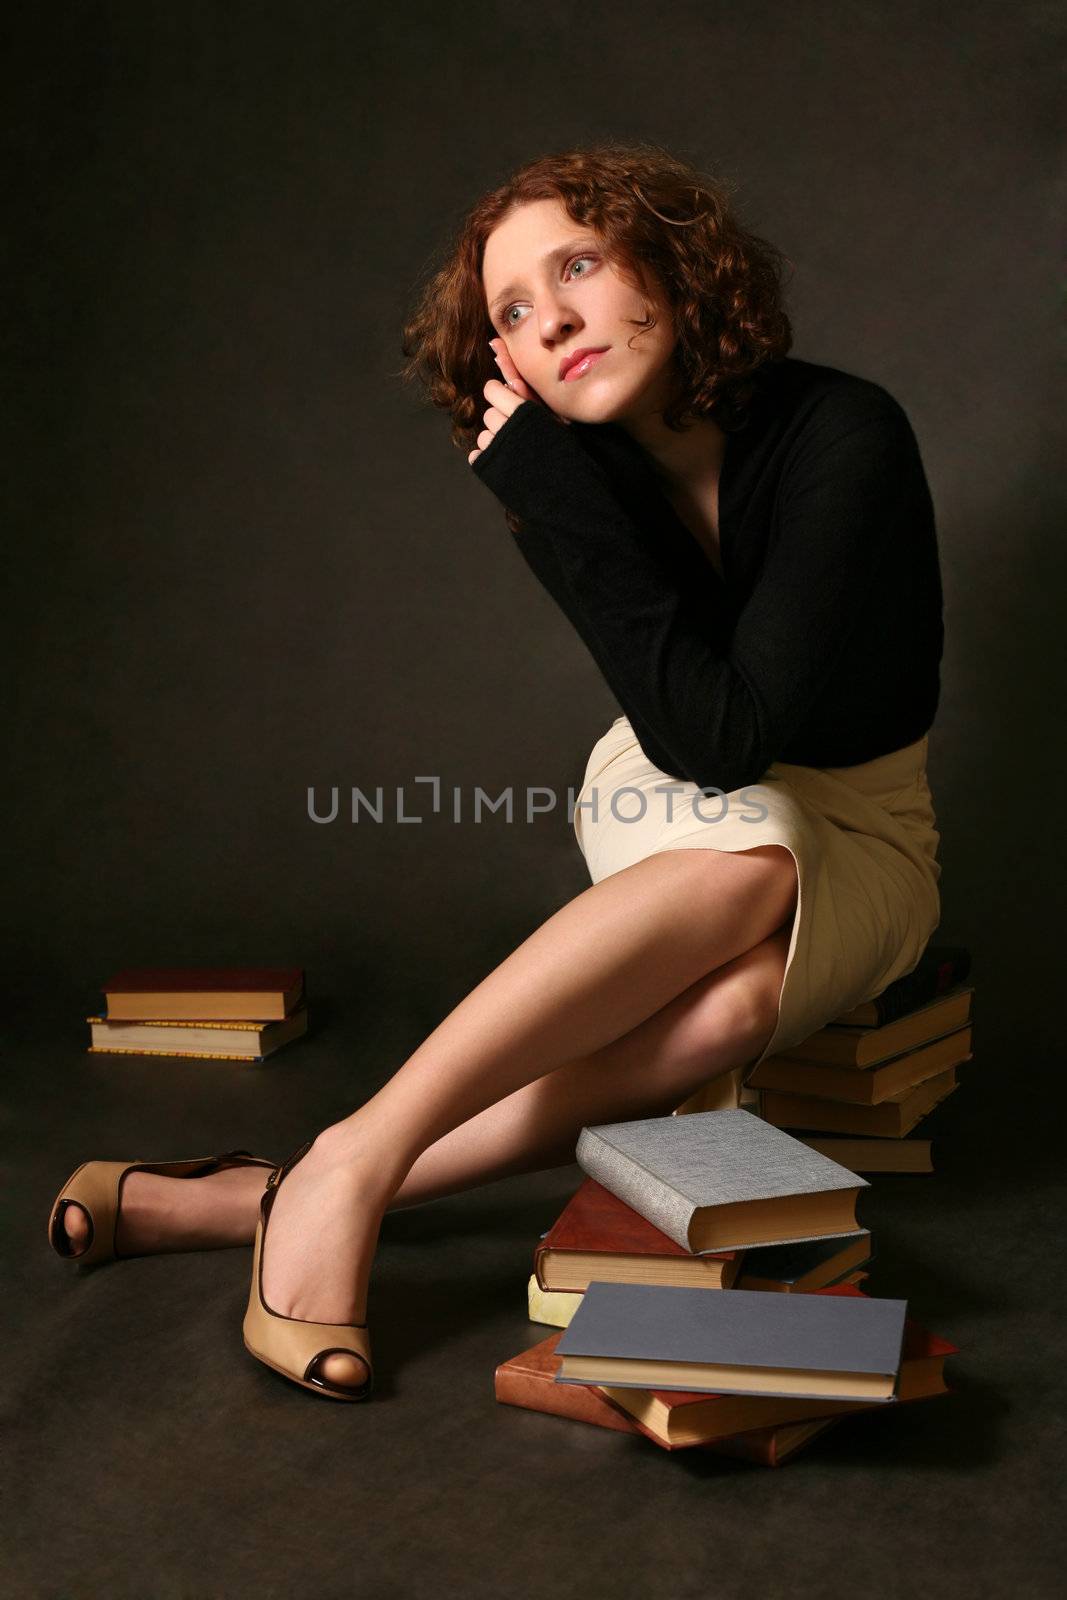 The thoughtful red-haired girl with books